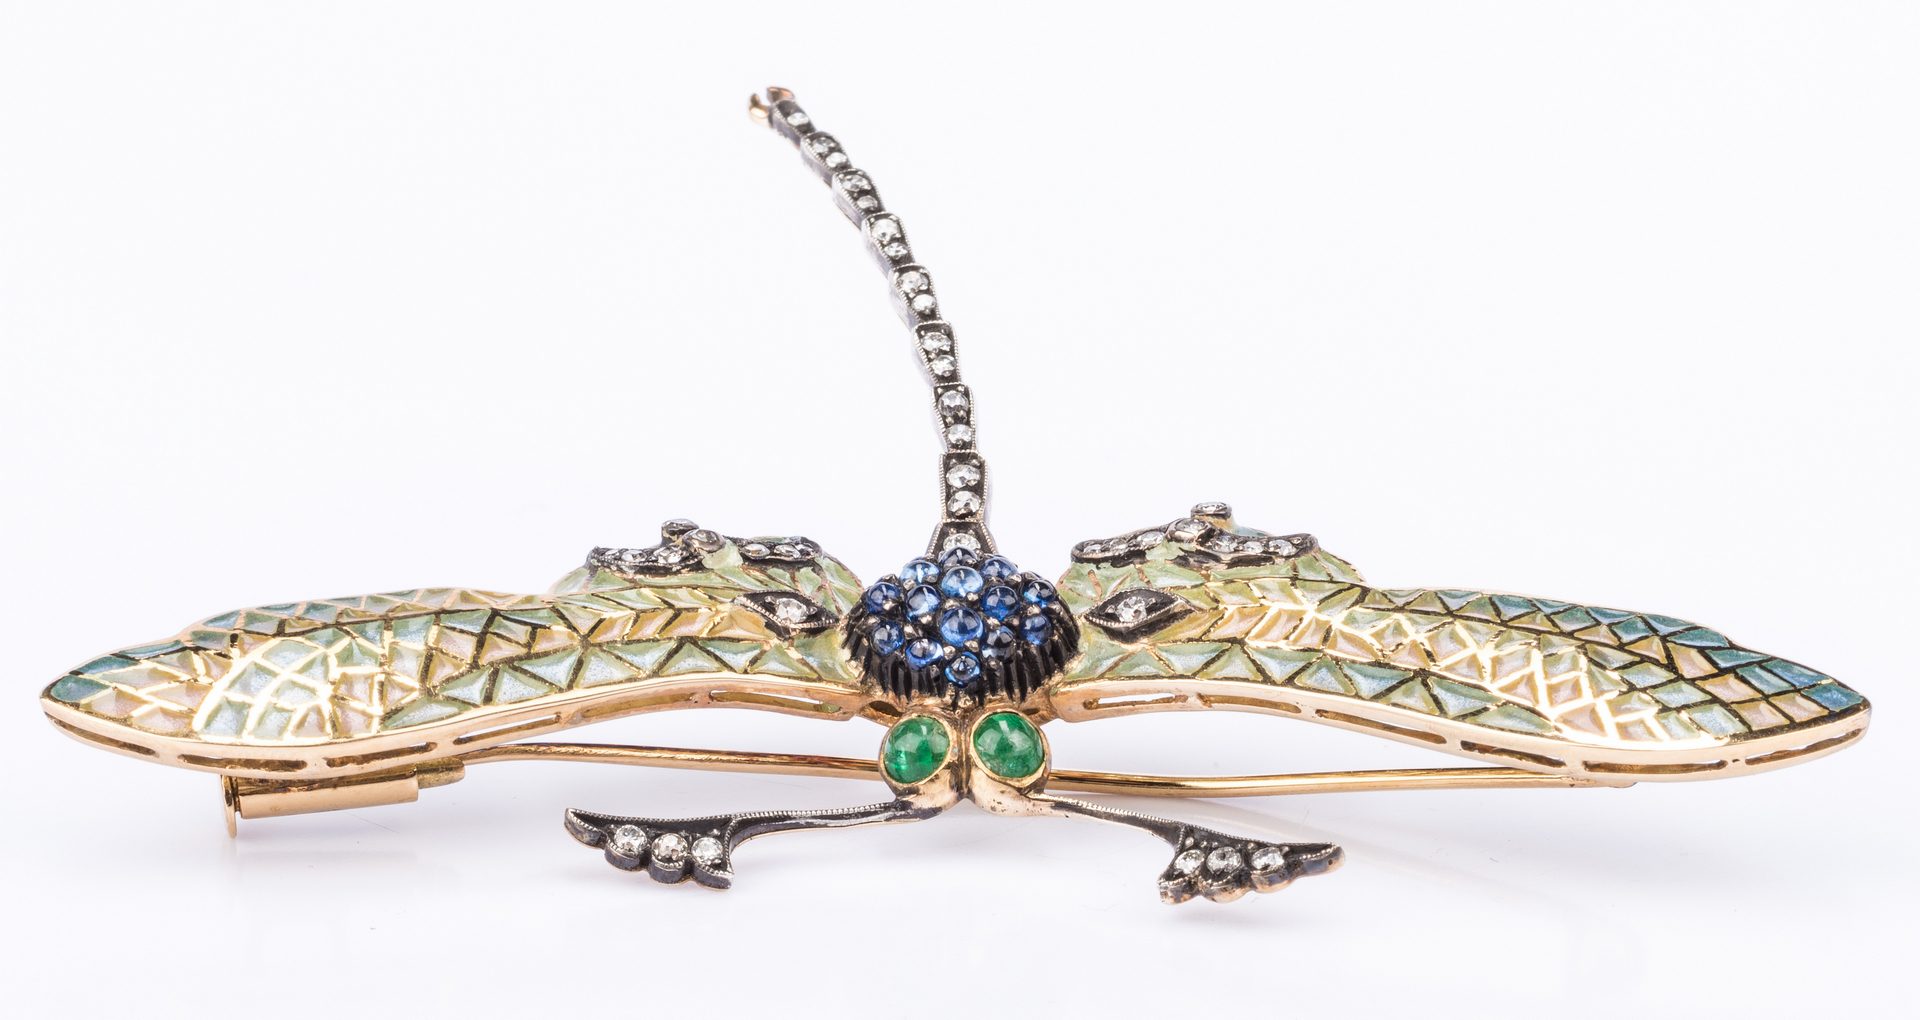 Lot 207: Jeweled Dragonfly Pin with Enamel